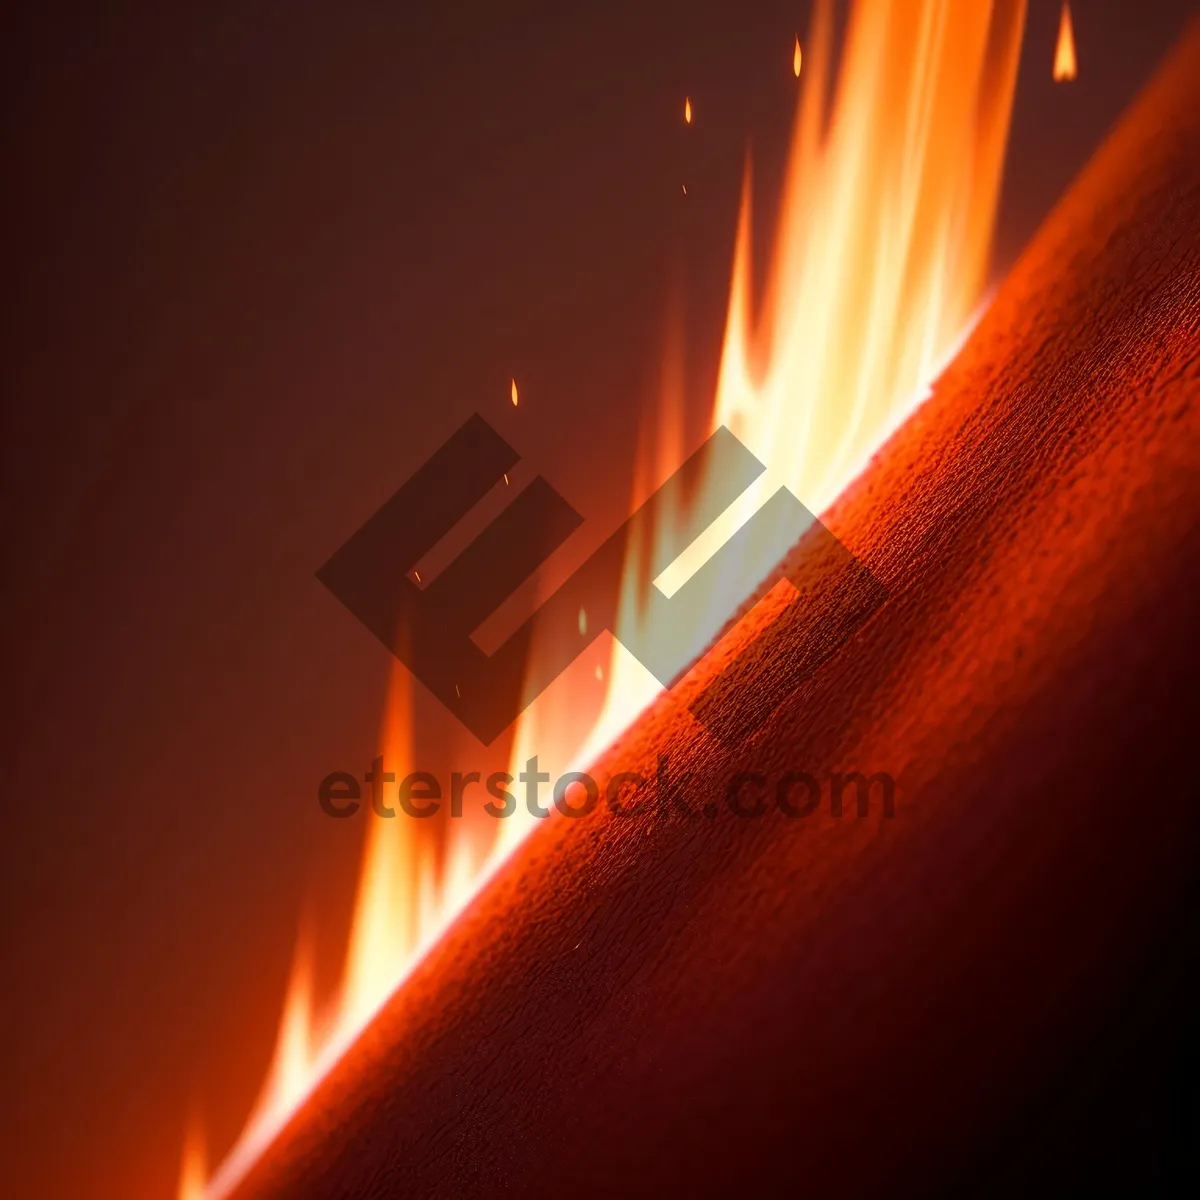 Picture of Fiery Glow: Matches Igniting a Bright Flame